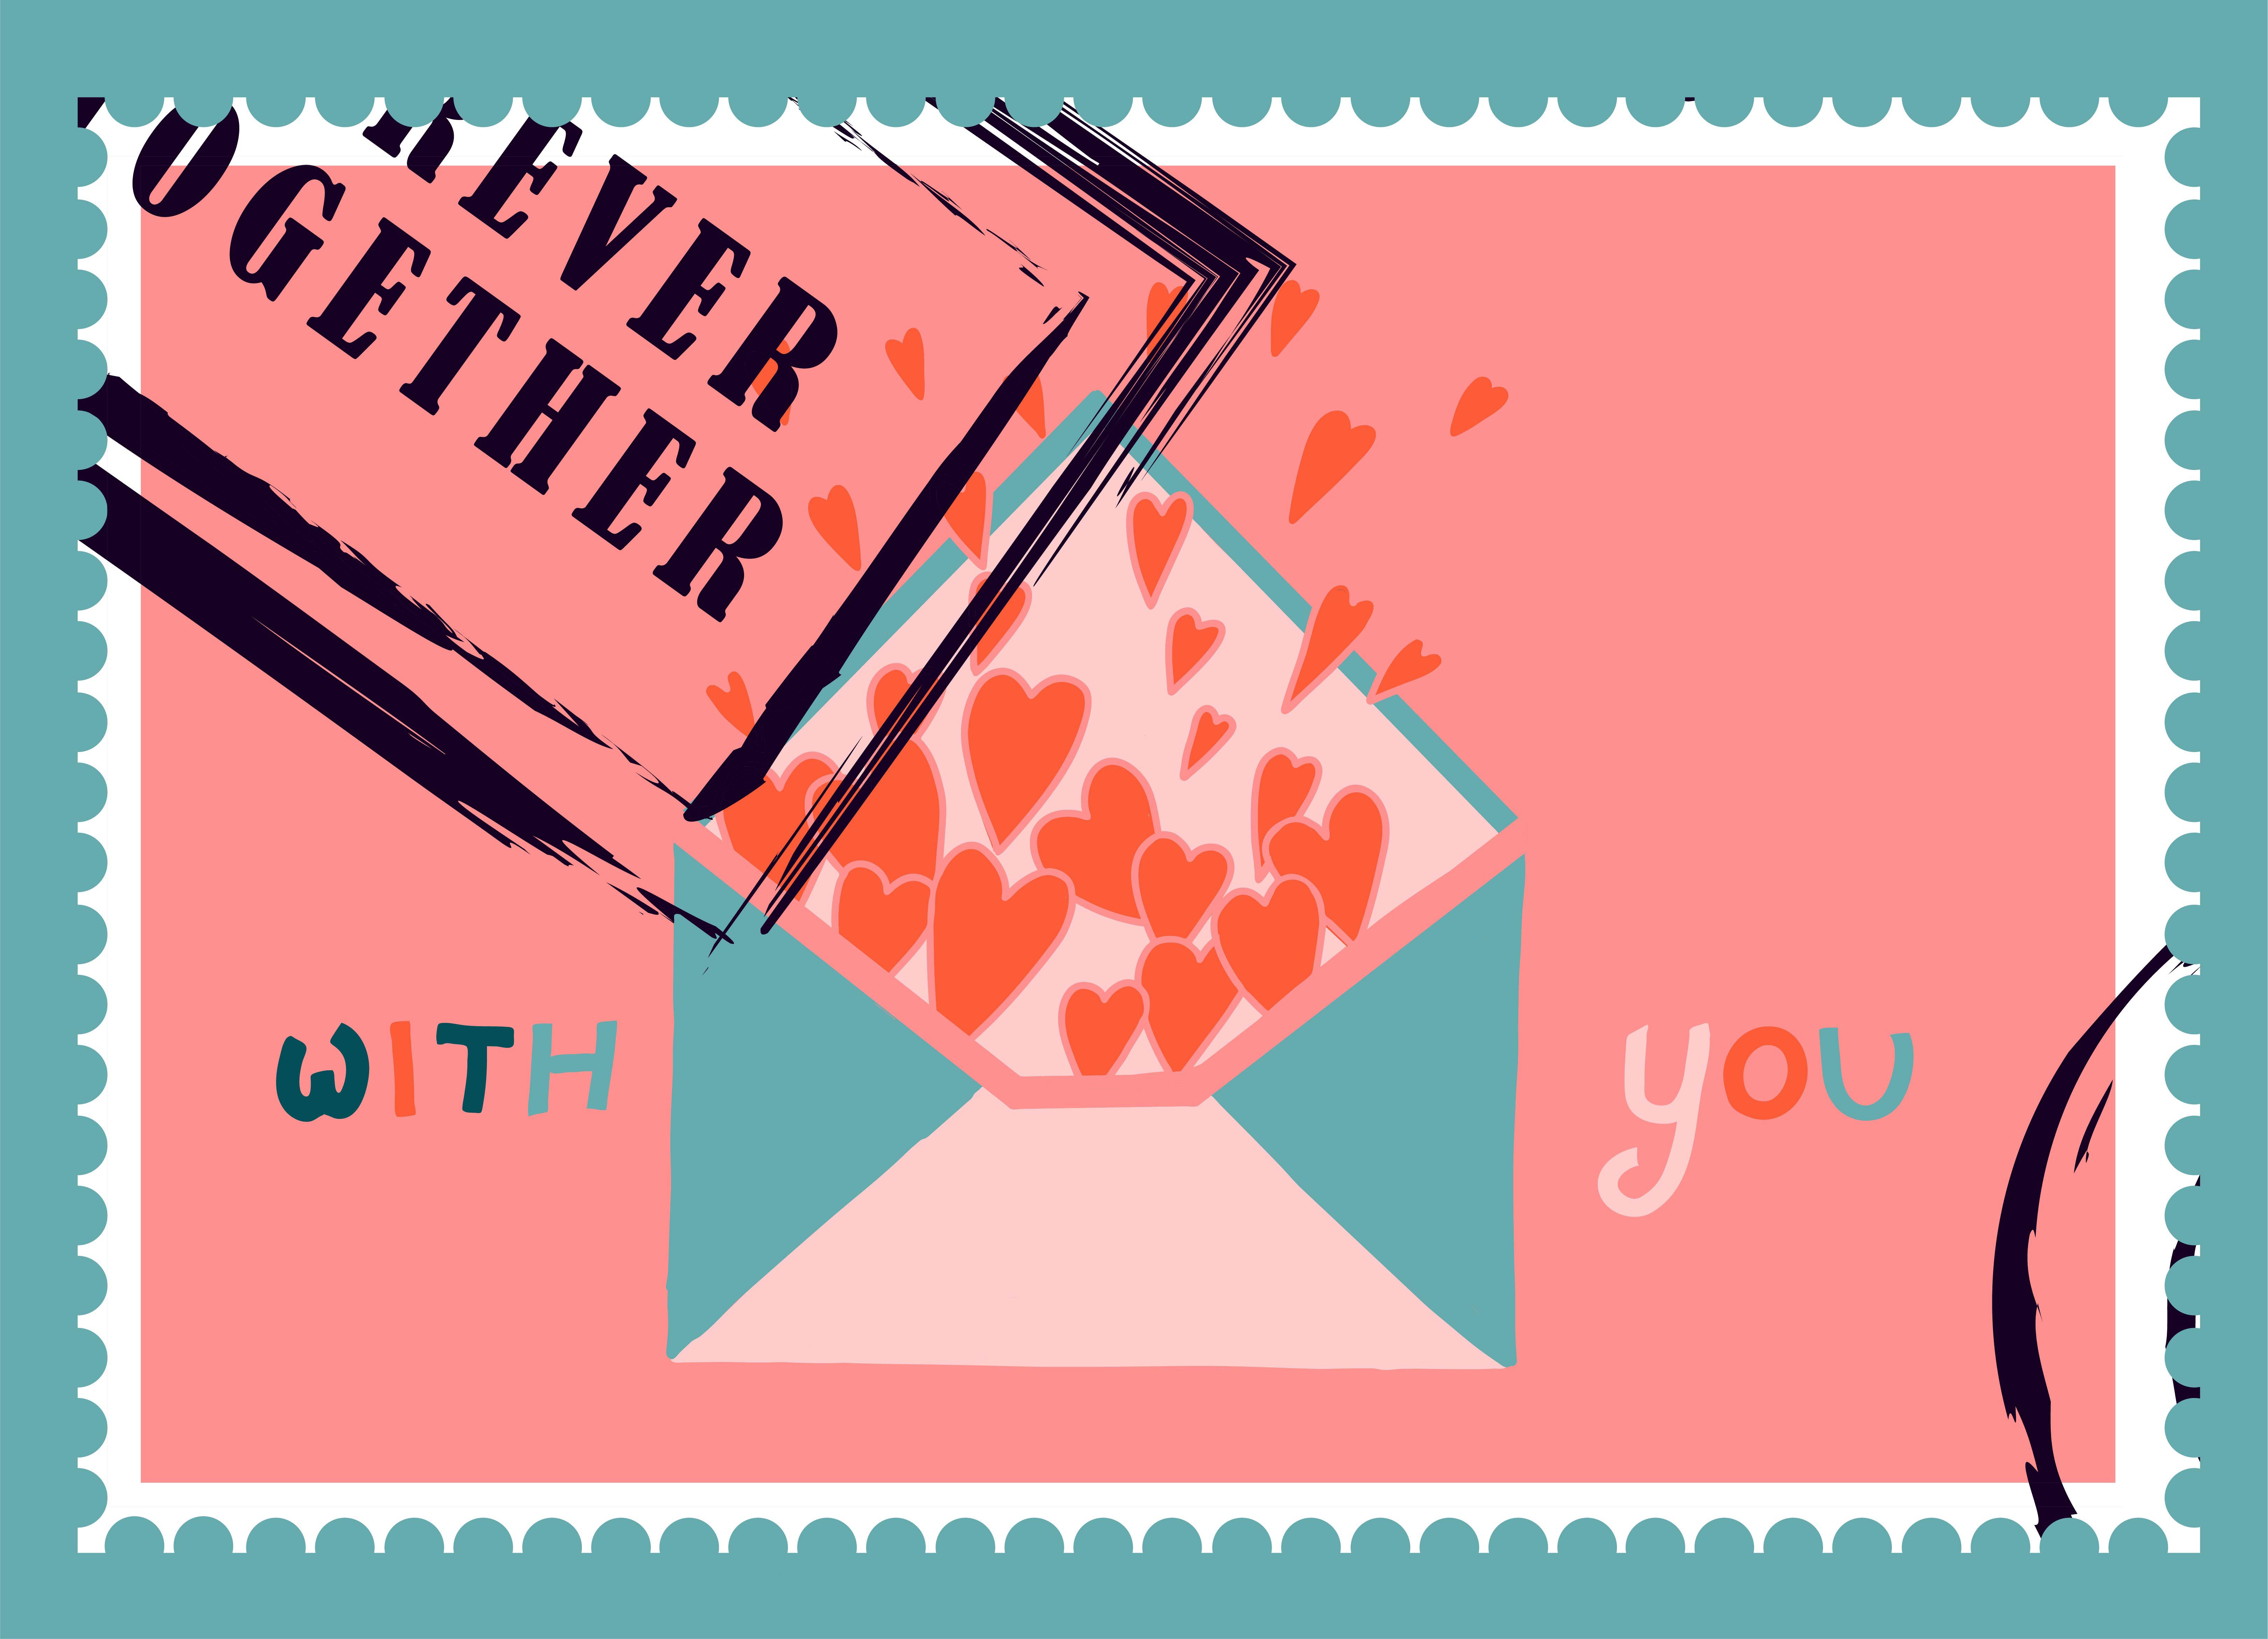 romantic postage stamps. envelopes and cards for valentine&rsquo;s day. Top-down view. Modern vector illustration for web design and print. Retro stamps. Correspondence and postal delivery concept.. romantic postage stamps. envelopes and cards for valentine&rsquo;s day. Top-down view. Modern vector illustration for web design and print. Retro stamps. Correspondence and postal delivery concept